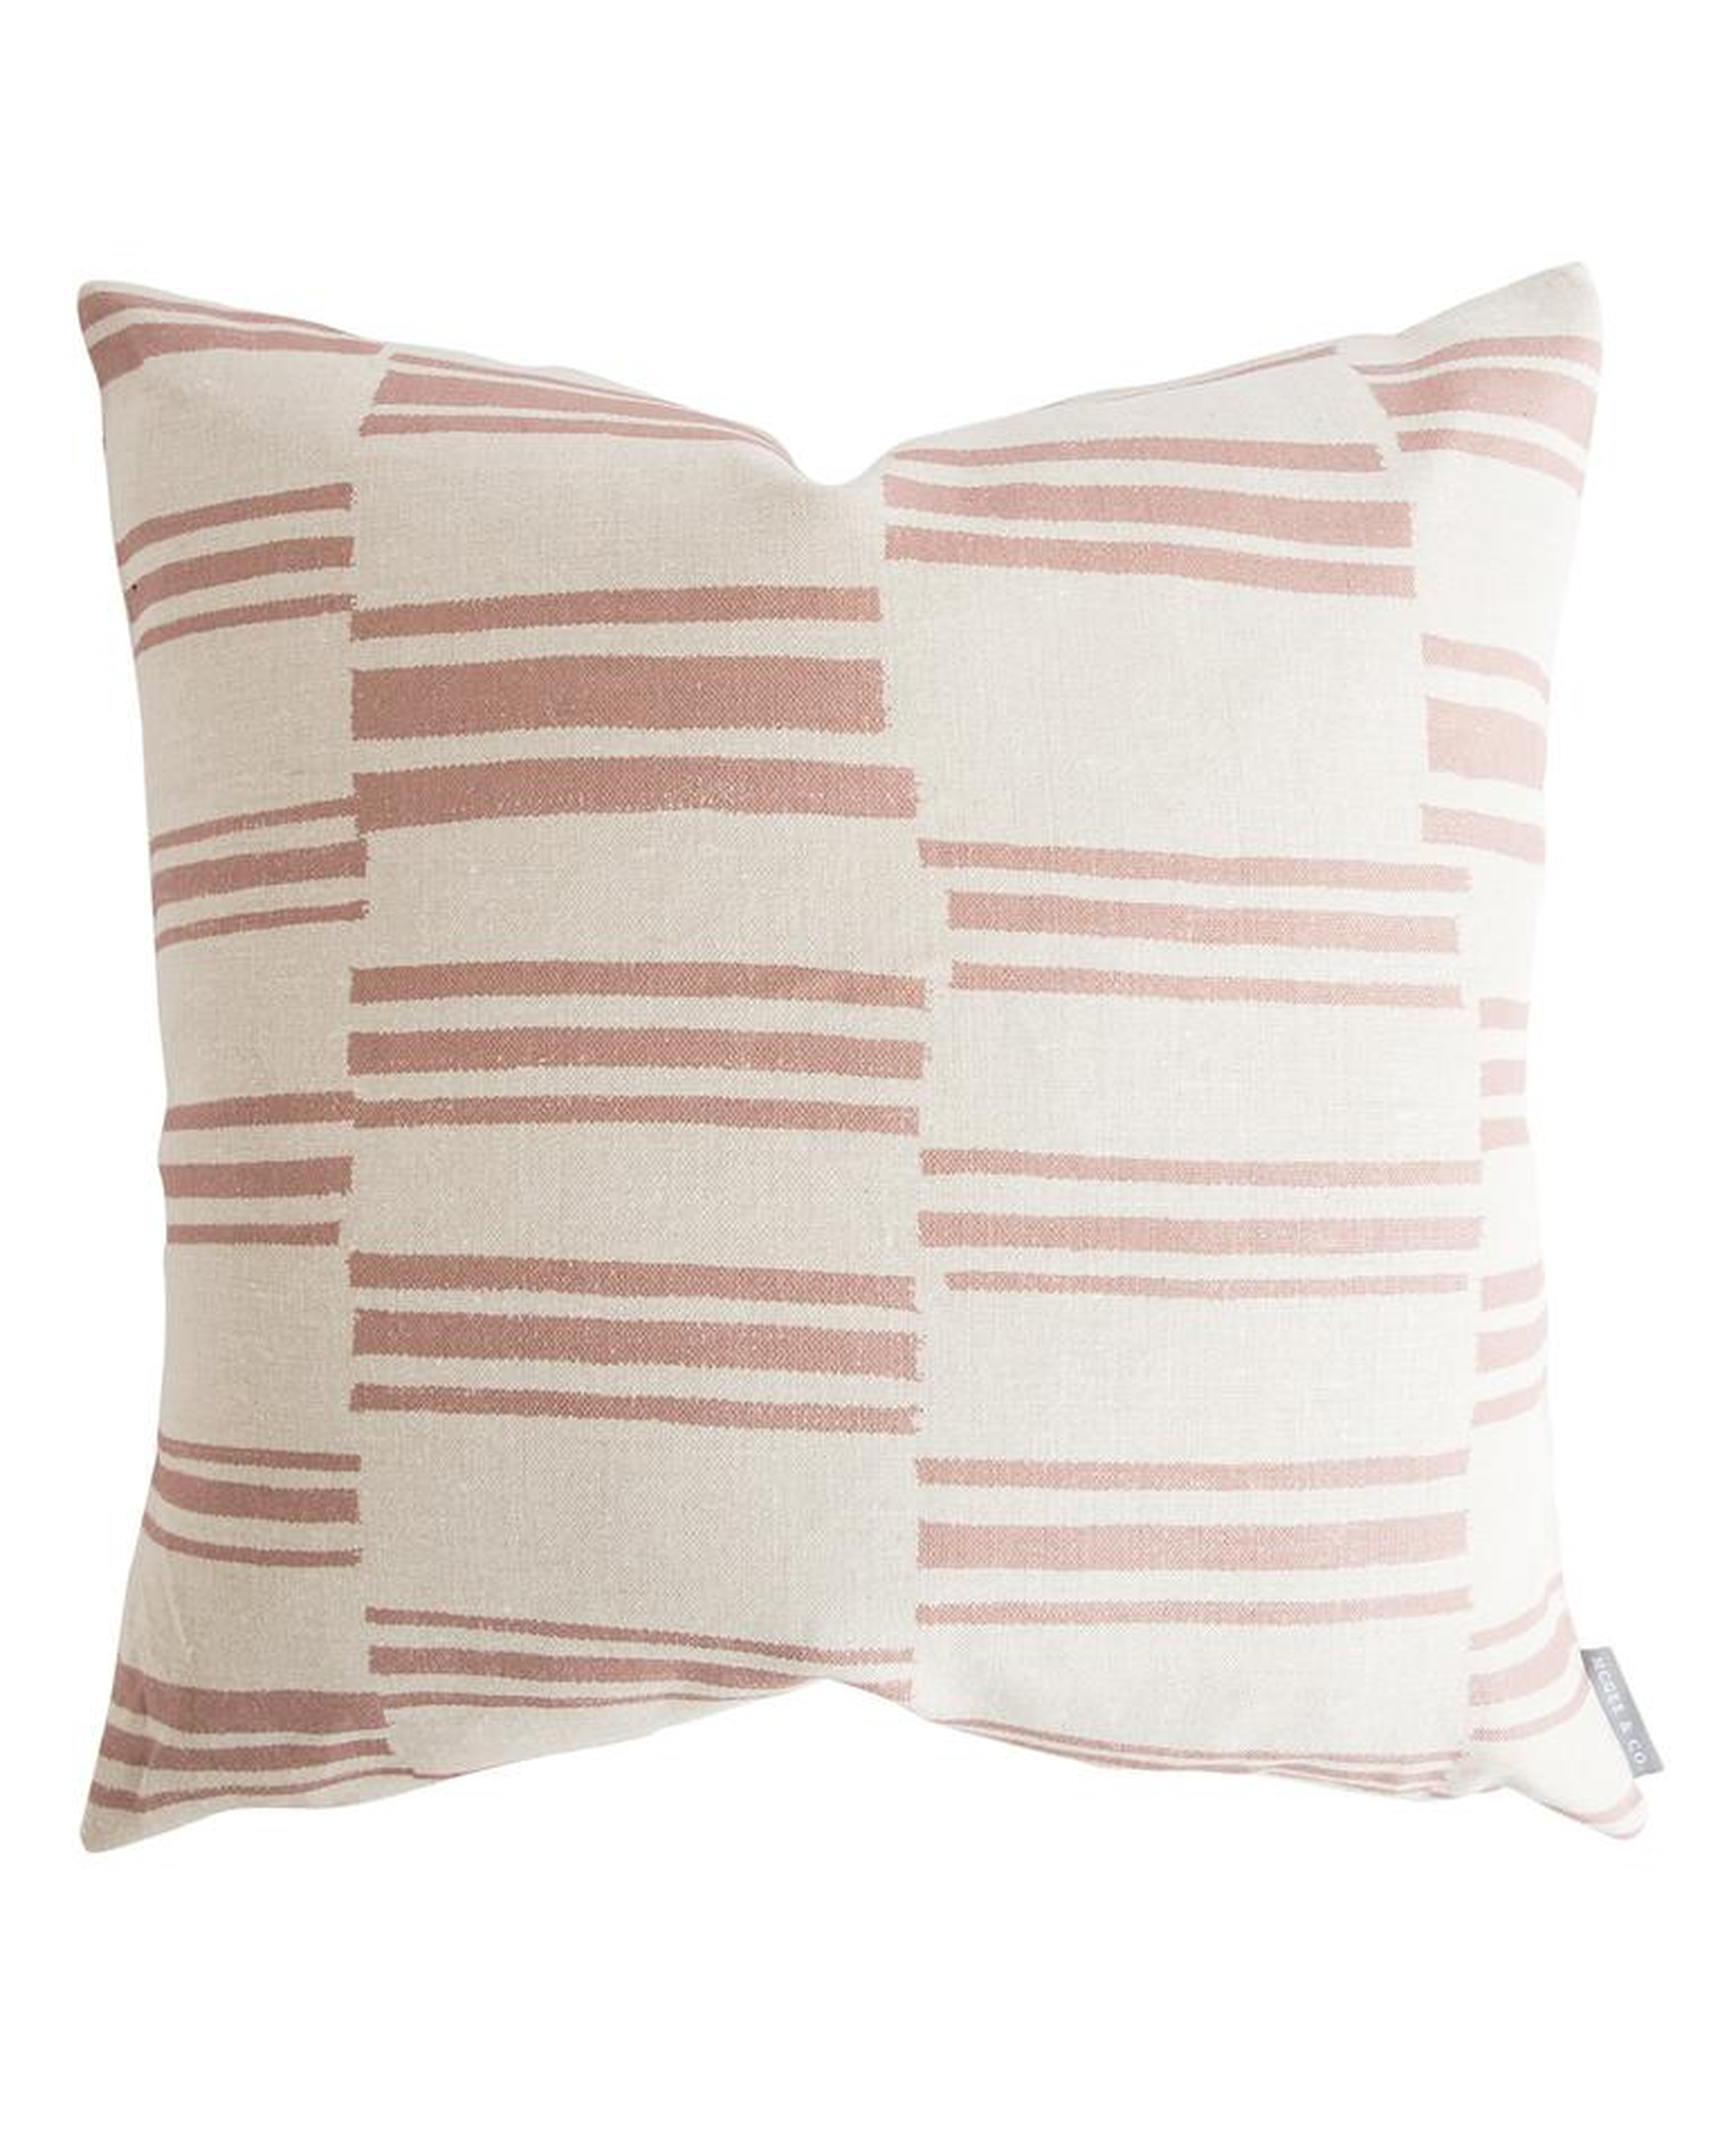 BEVERLY PILLOW WITHOUT INSERT, 24" x 24" - McGee & Co.